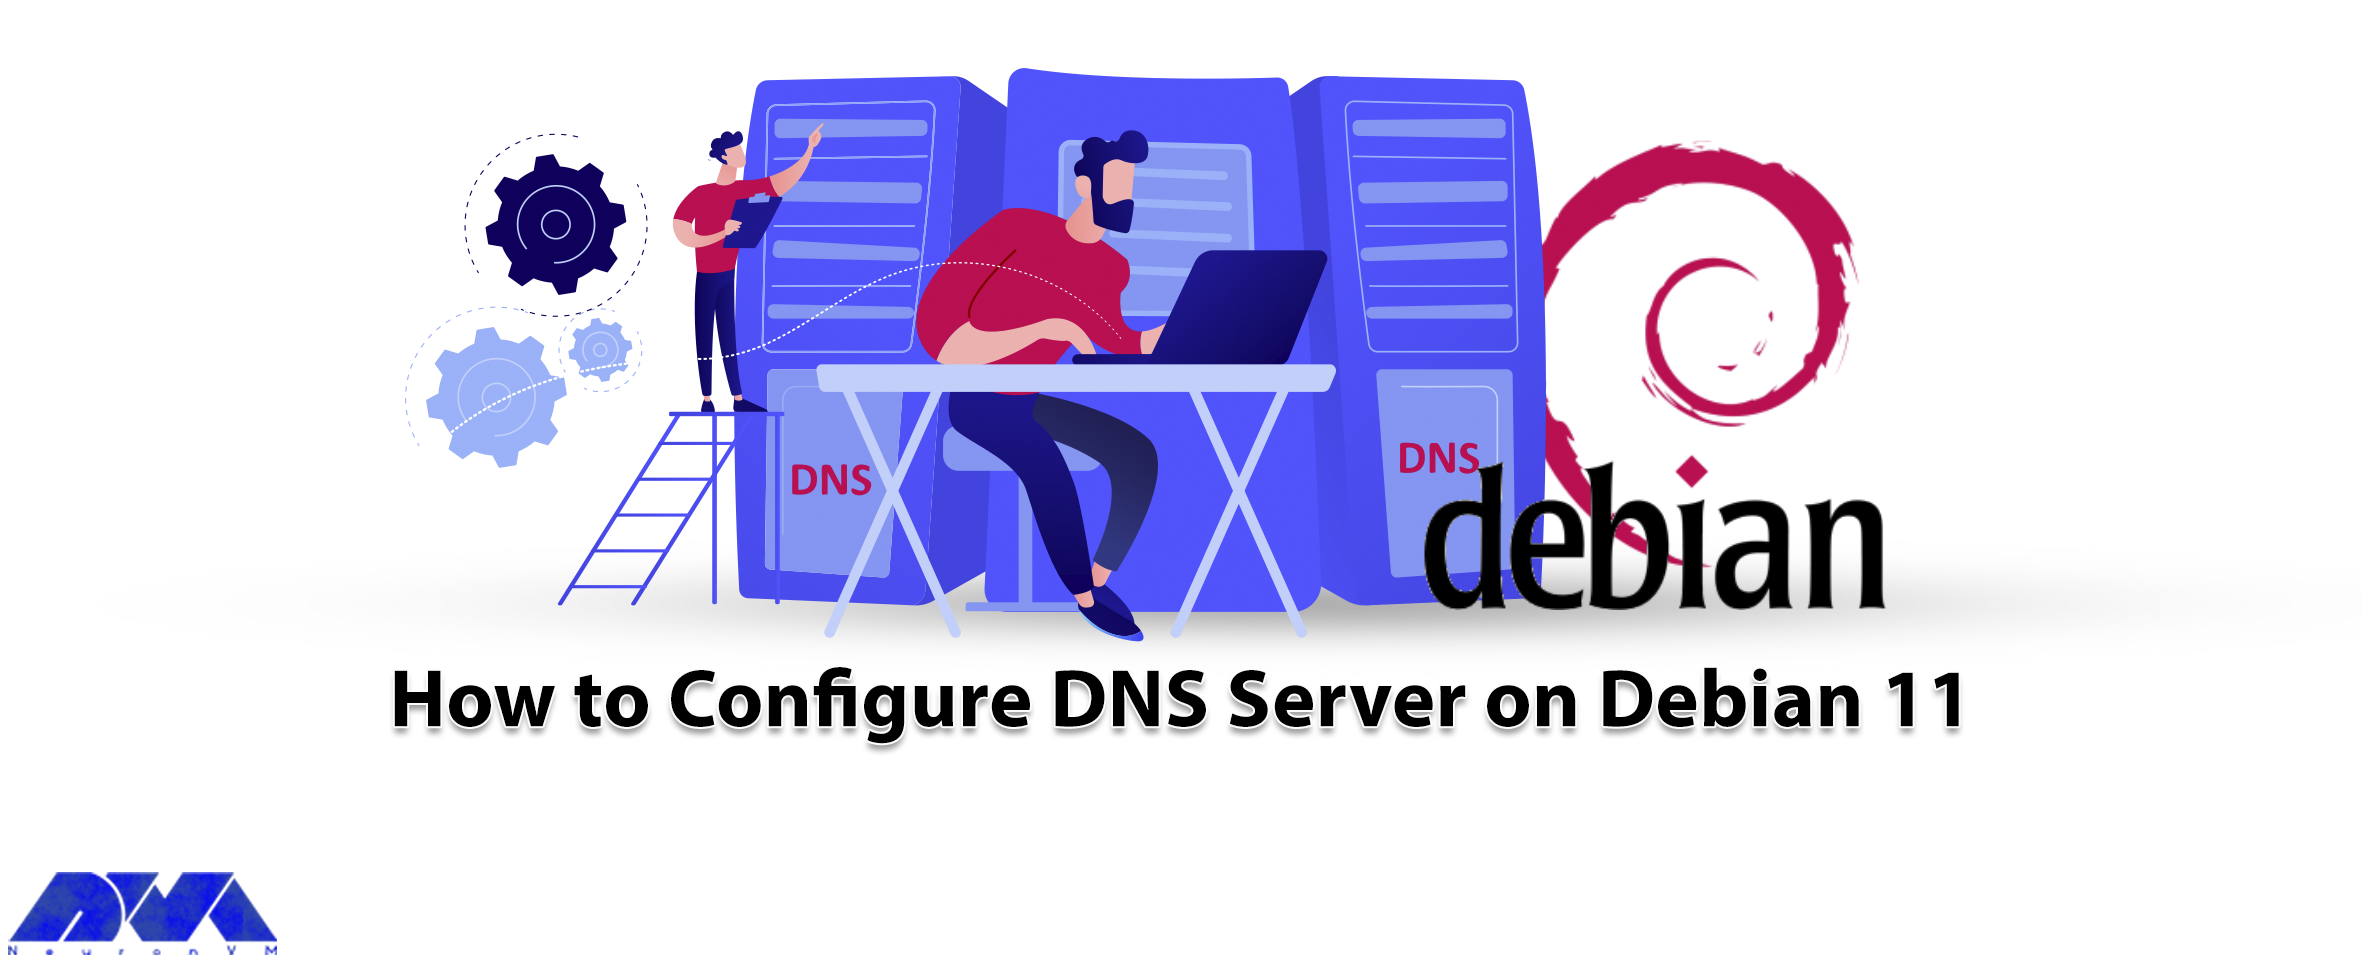 How to Configure DNS Server on Debian 11 - NeuronVM